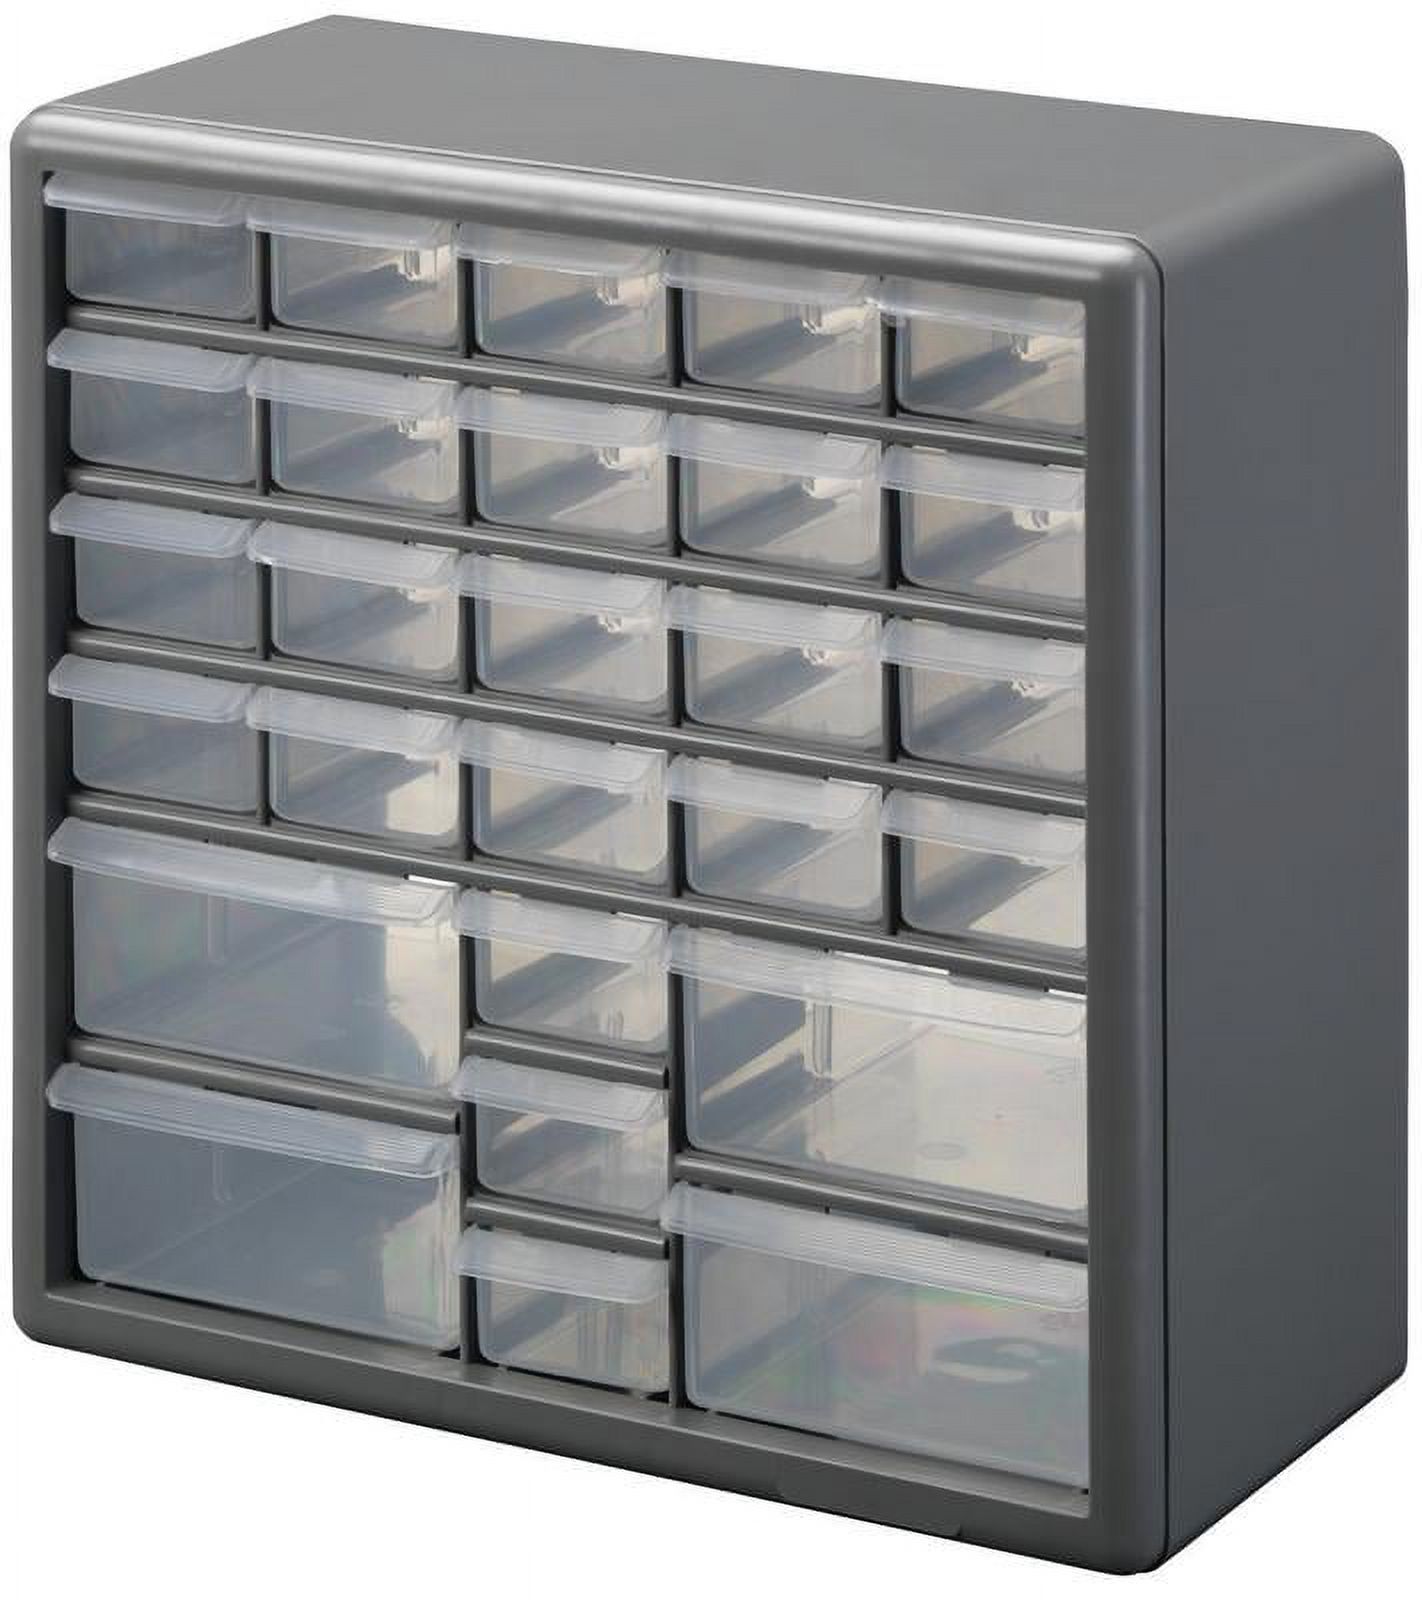 STACK-ON PRODUCTS DS-27 STORAGE CAB 27DWR SLVRGY - image 1 of 1